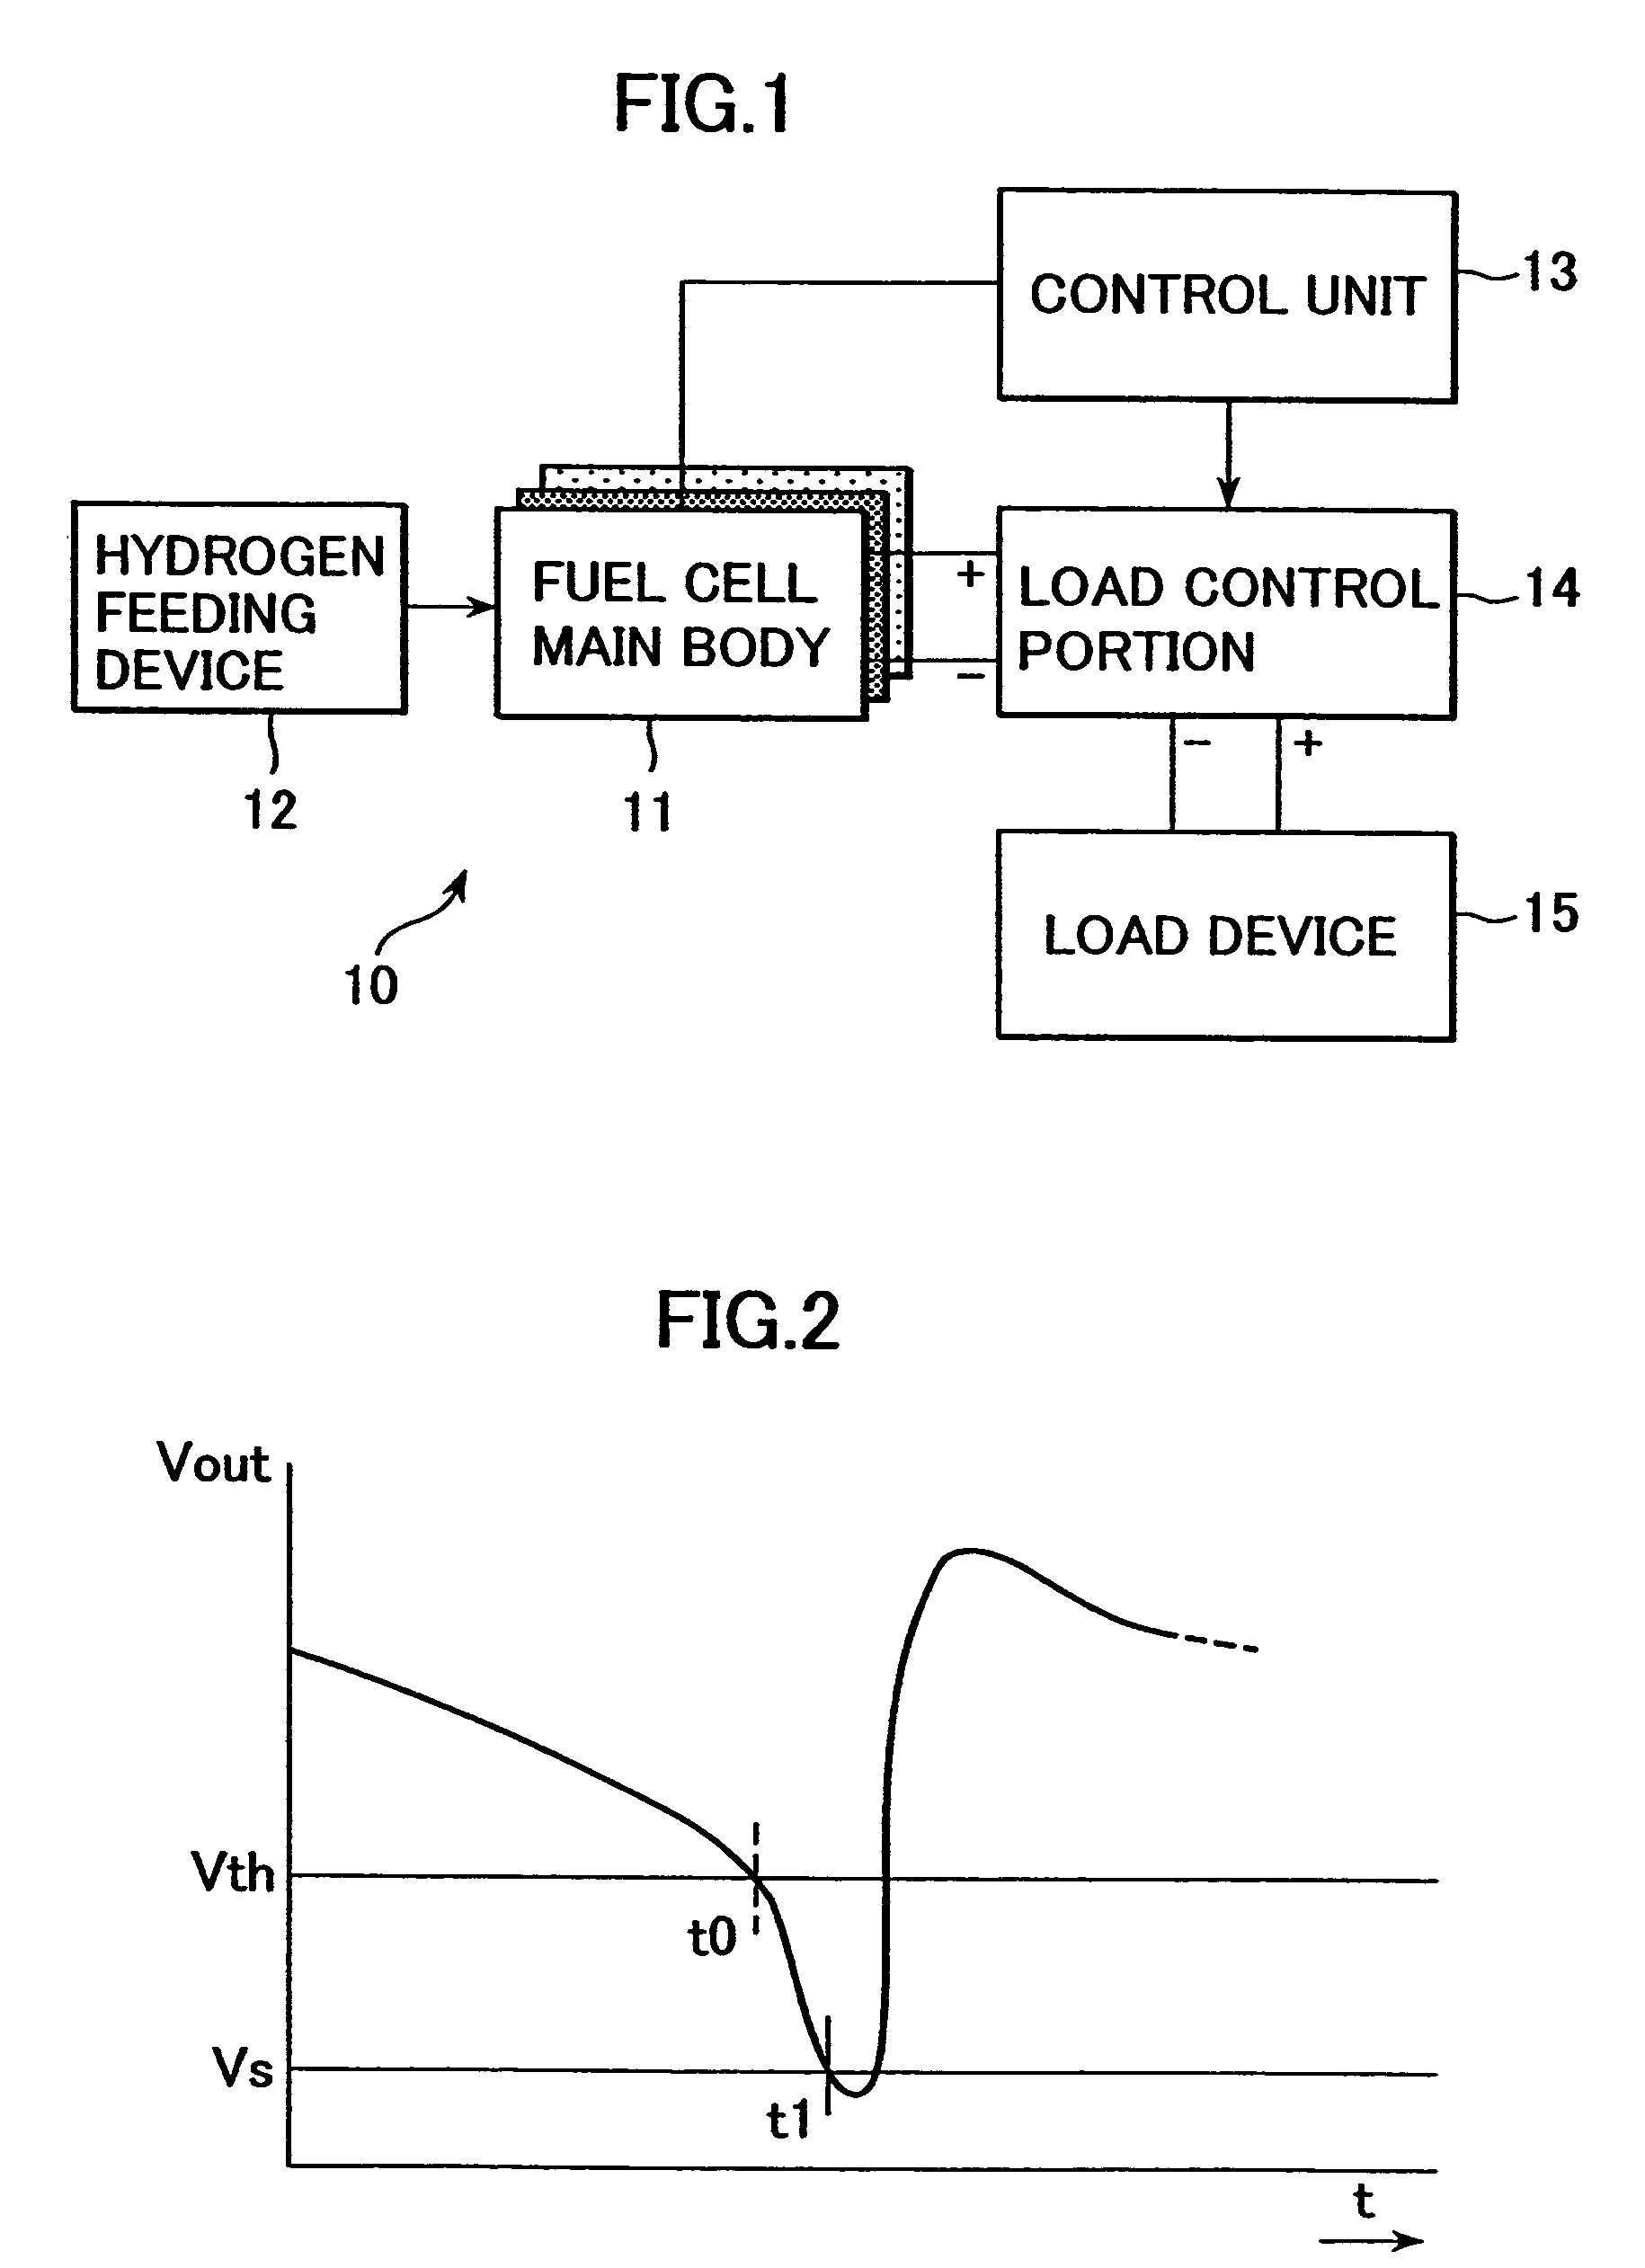 Fuel cell apparatus and method for controlling fuel